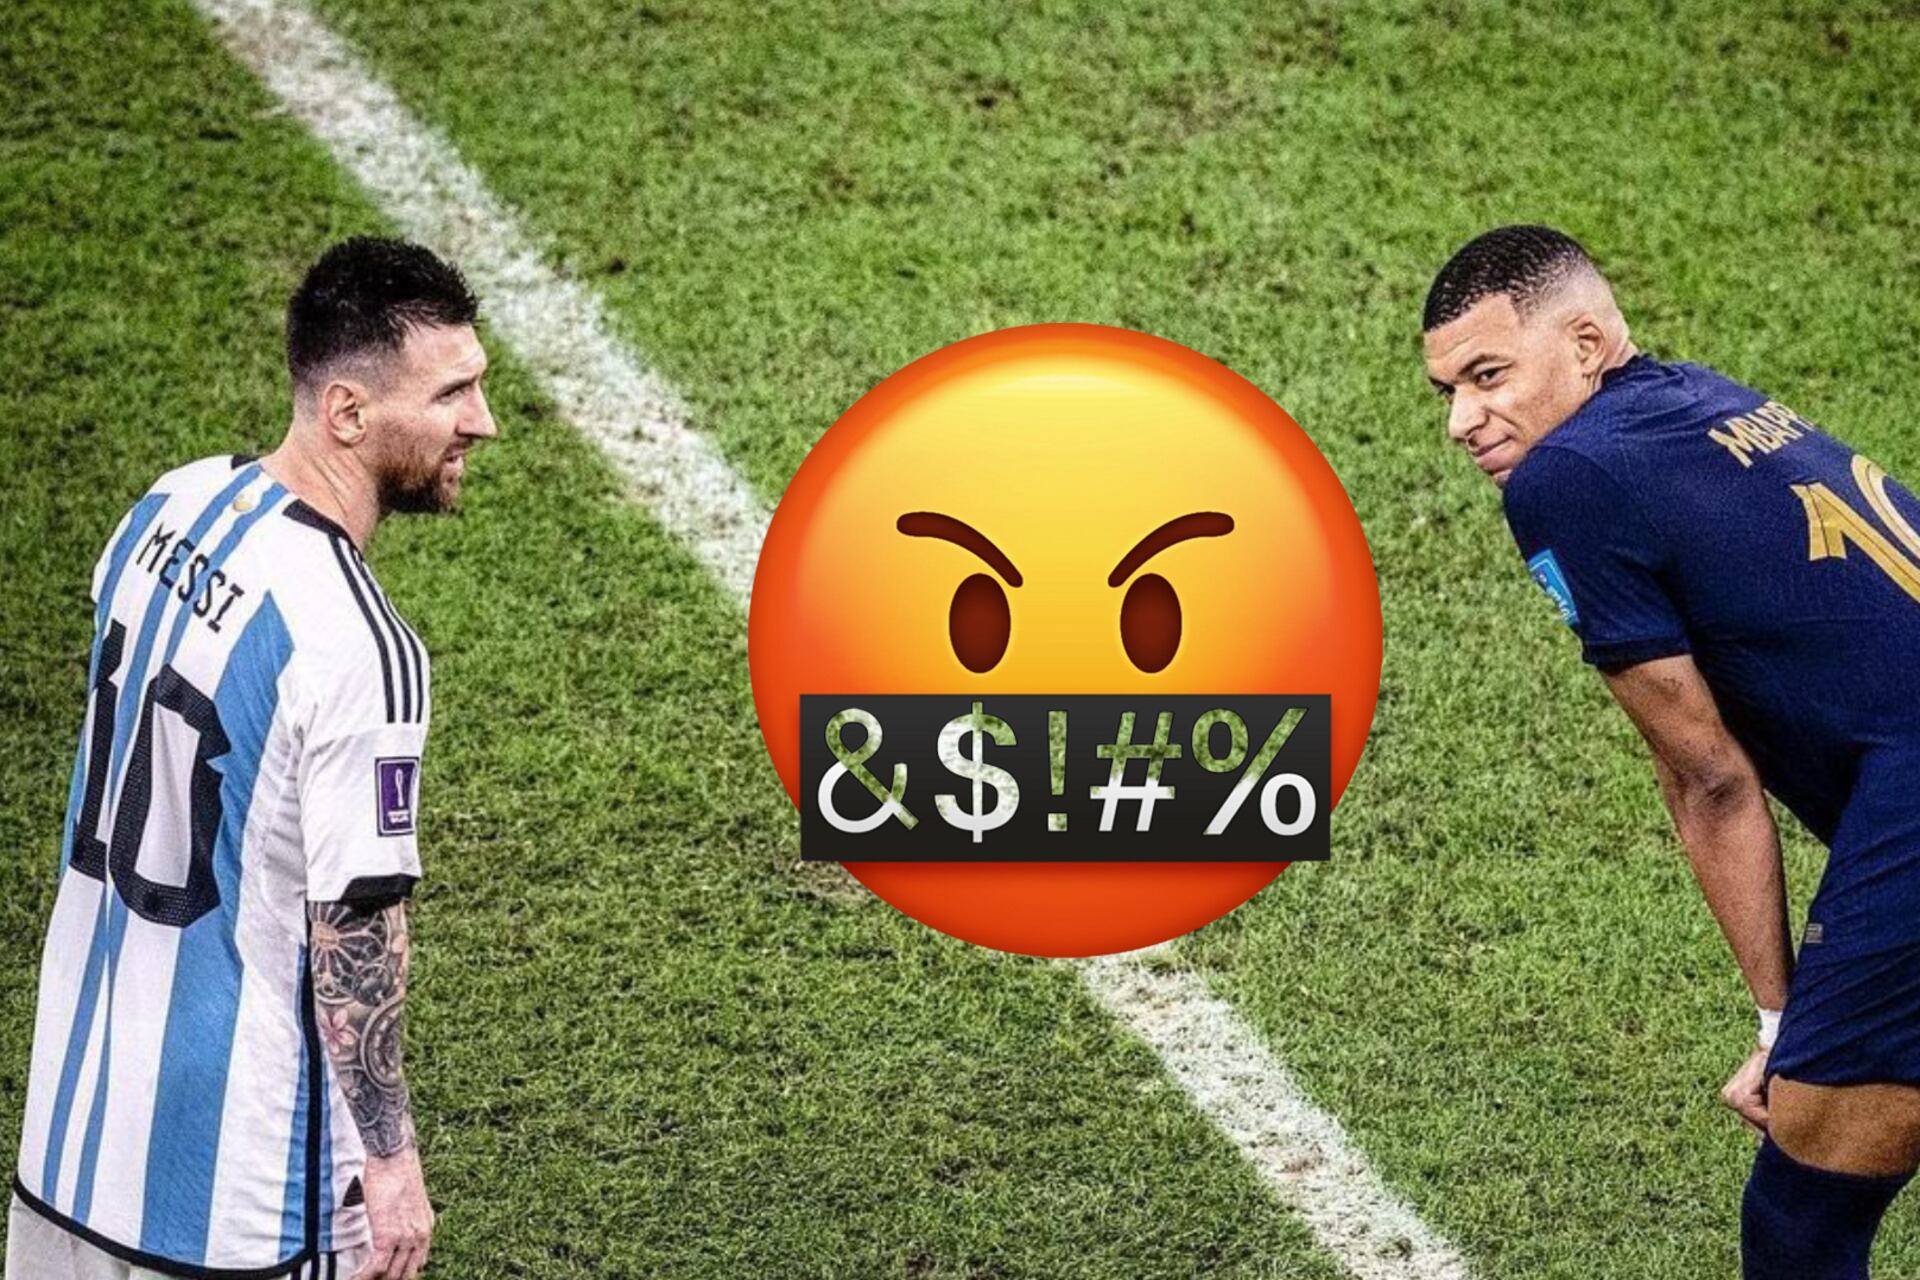 The insult Mbappé gave to Messi after losing to him in the 2022 World Cup